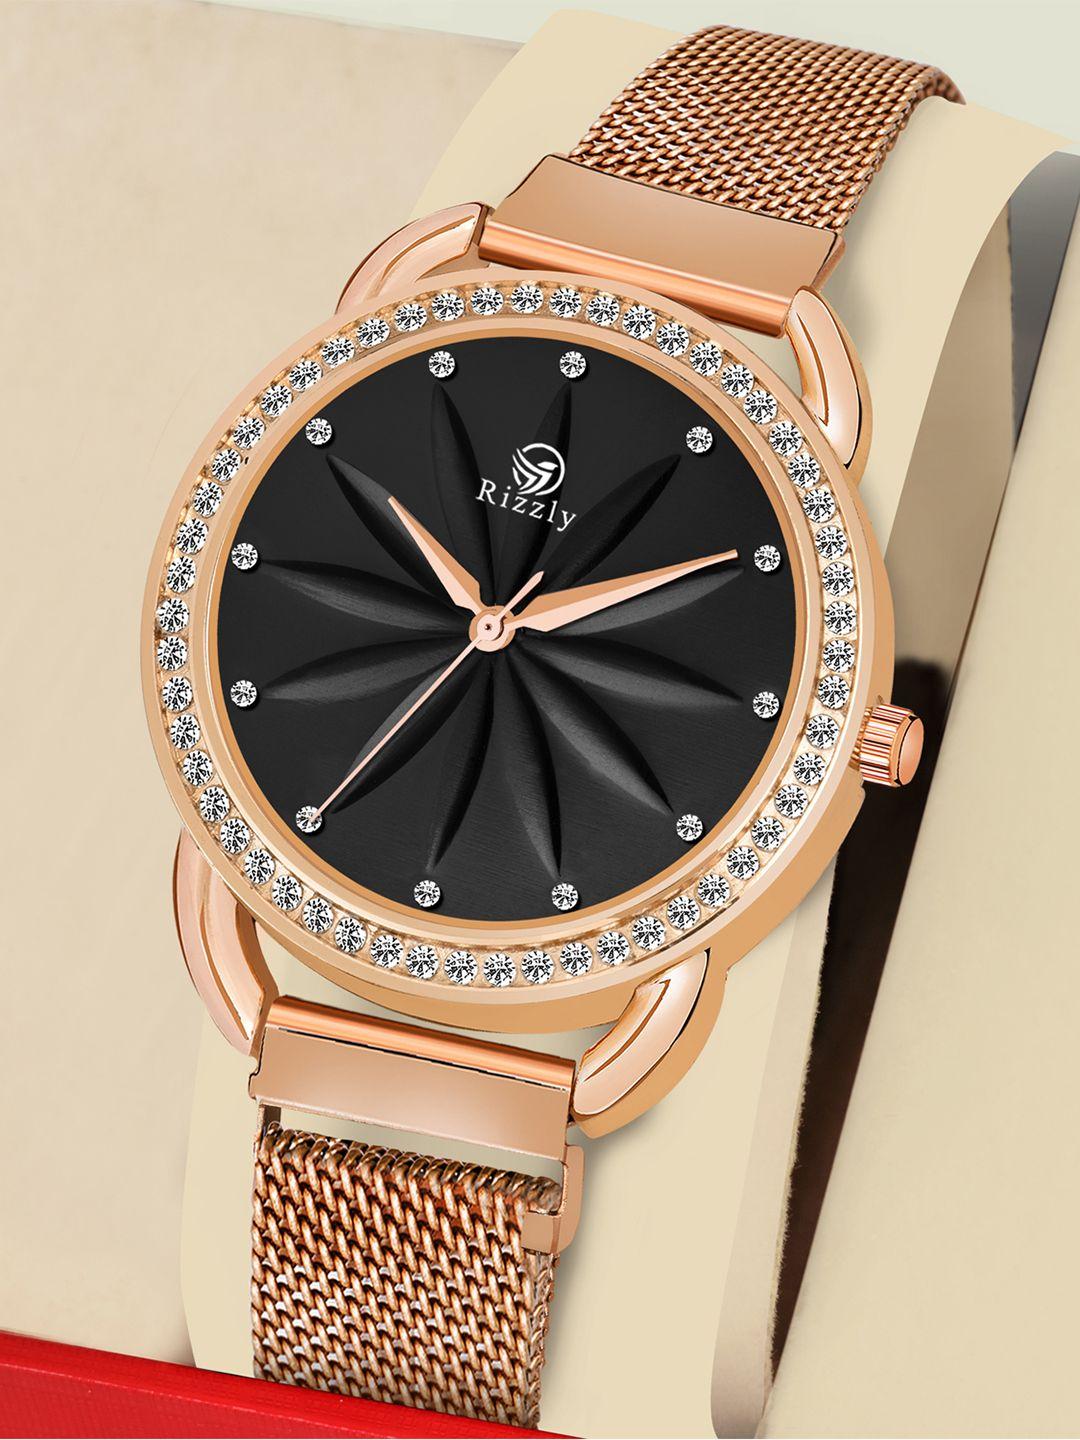 rizzly women black brass embellished dial rose gold stainless steel analogue watch rz-137